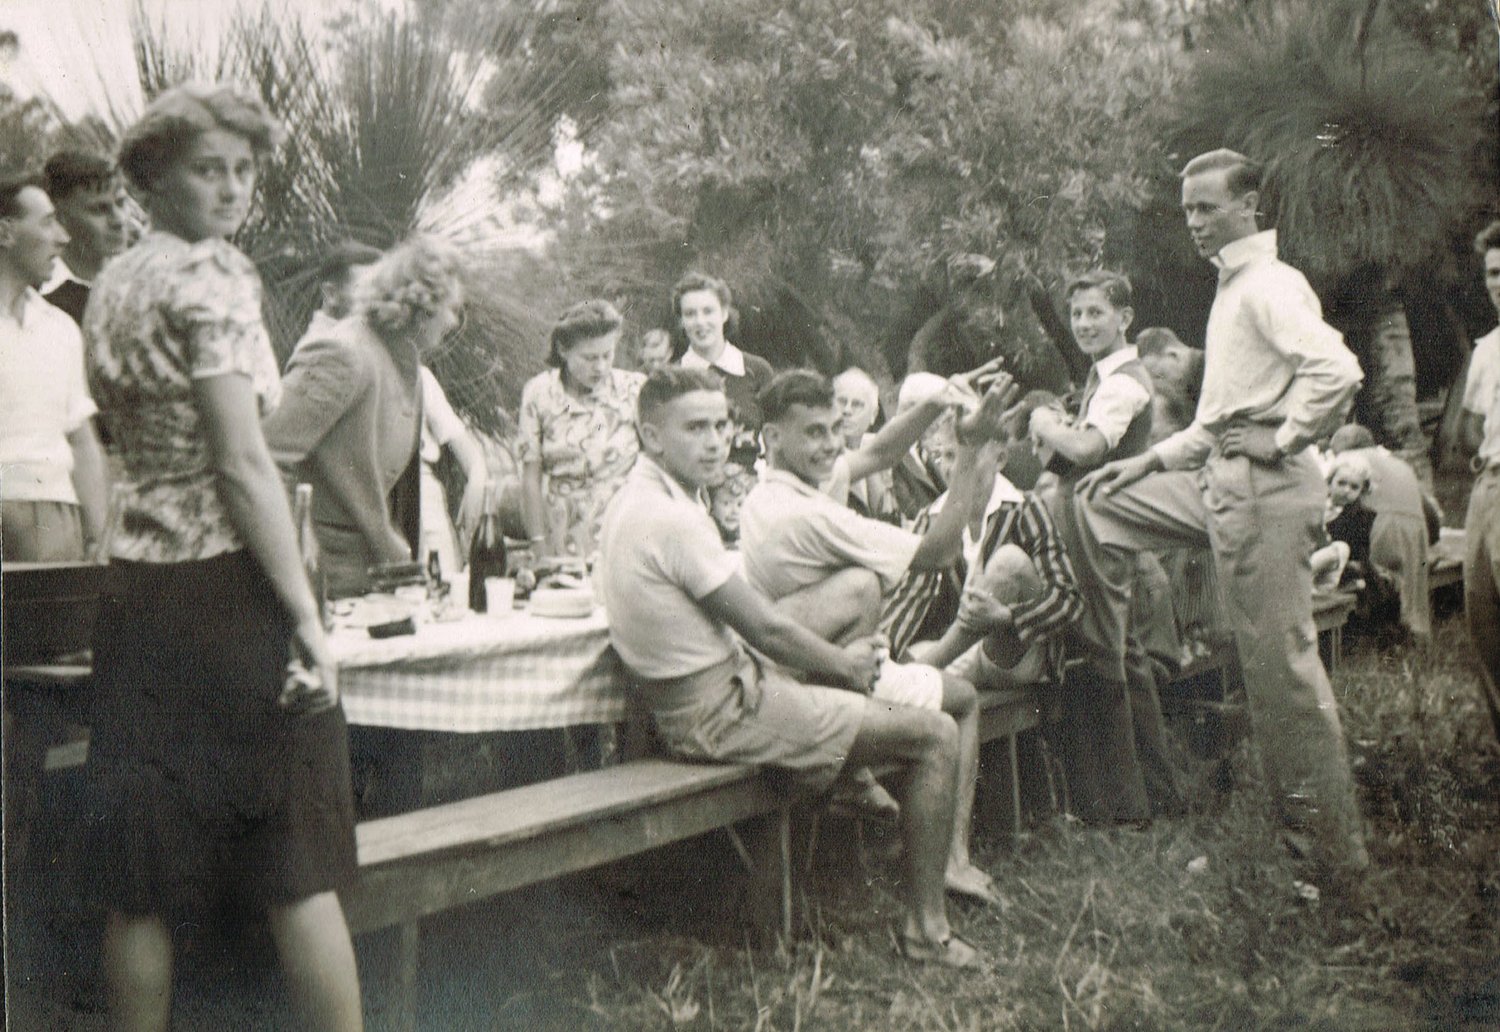 A J Baker & Sons’ staff picnic at Yanchep, 1941. Bert Baker is seated center background. Geoff Baker in trousers with foot up on the bench.